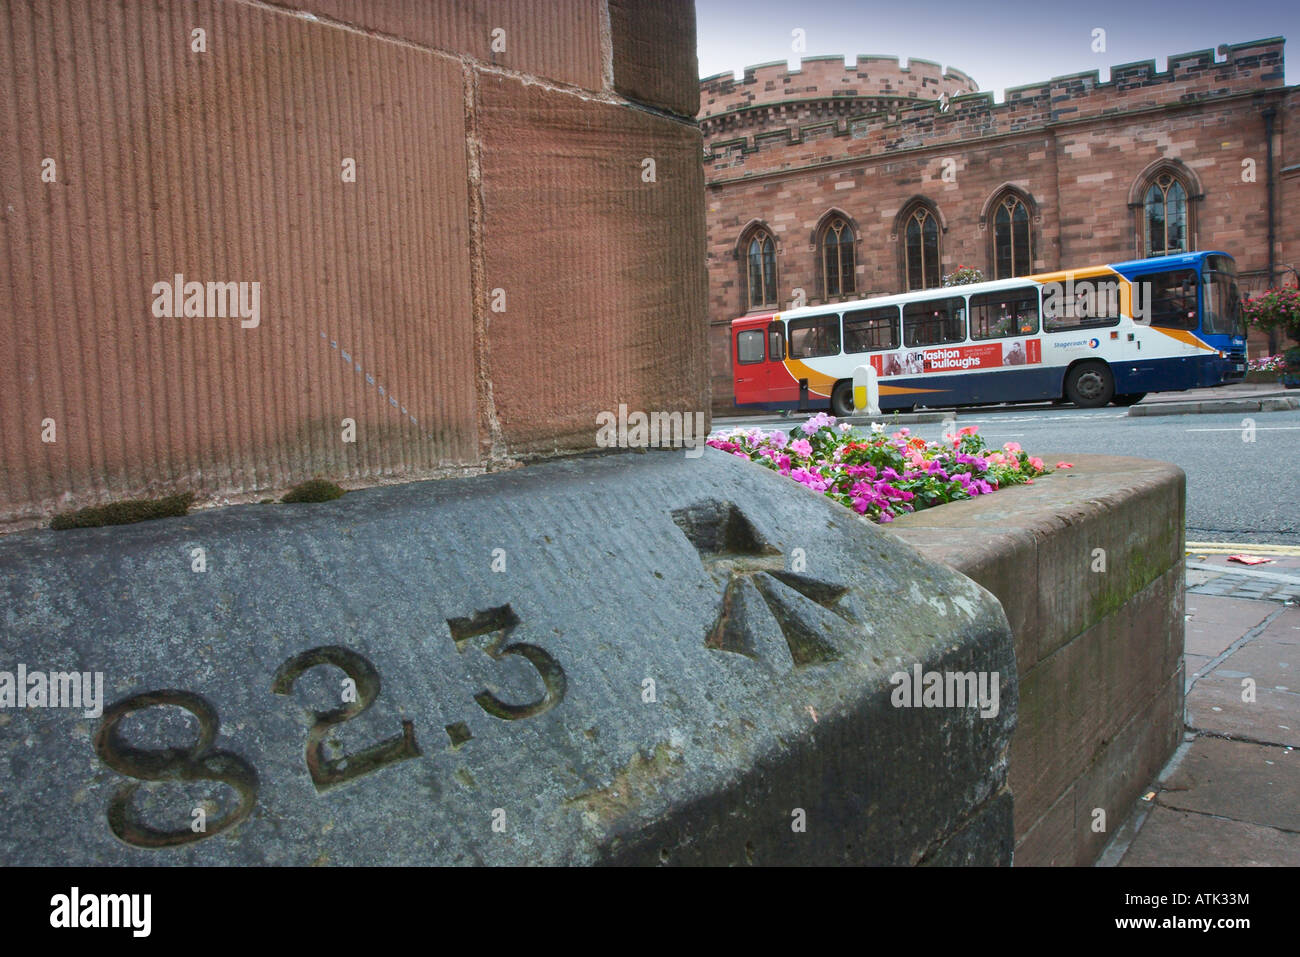 Public bus outside Carlisle County Council Offices with benchmark in foreground Stock Photo